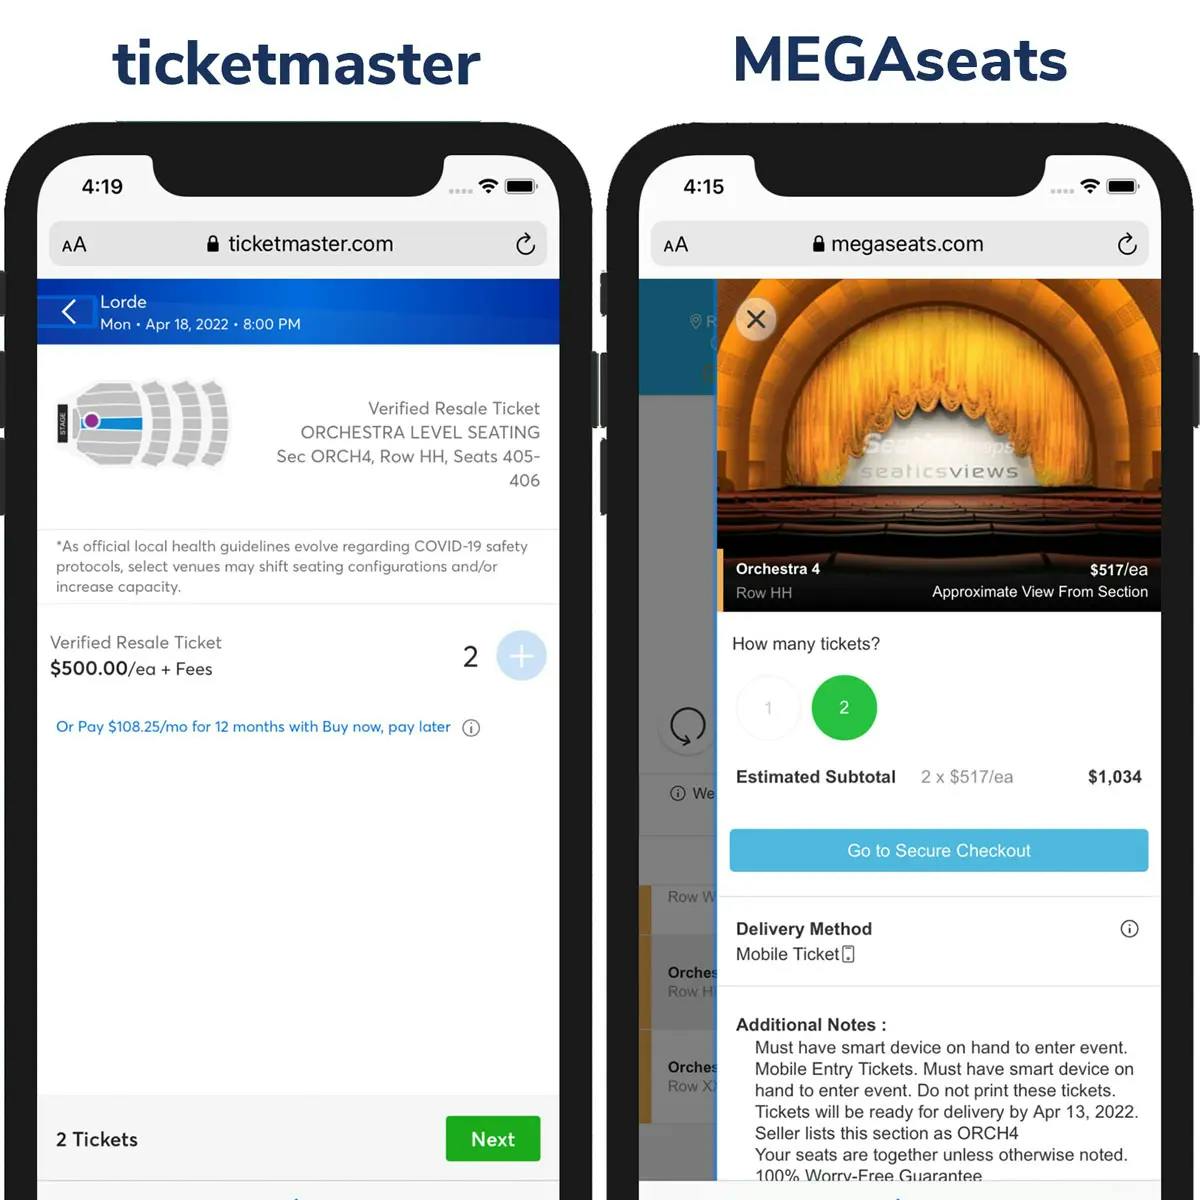 Screenshot of Ticketmaster price vs MegaSeats Price on Maps Page